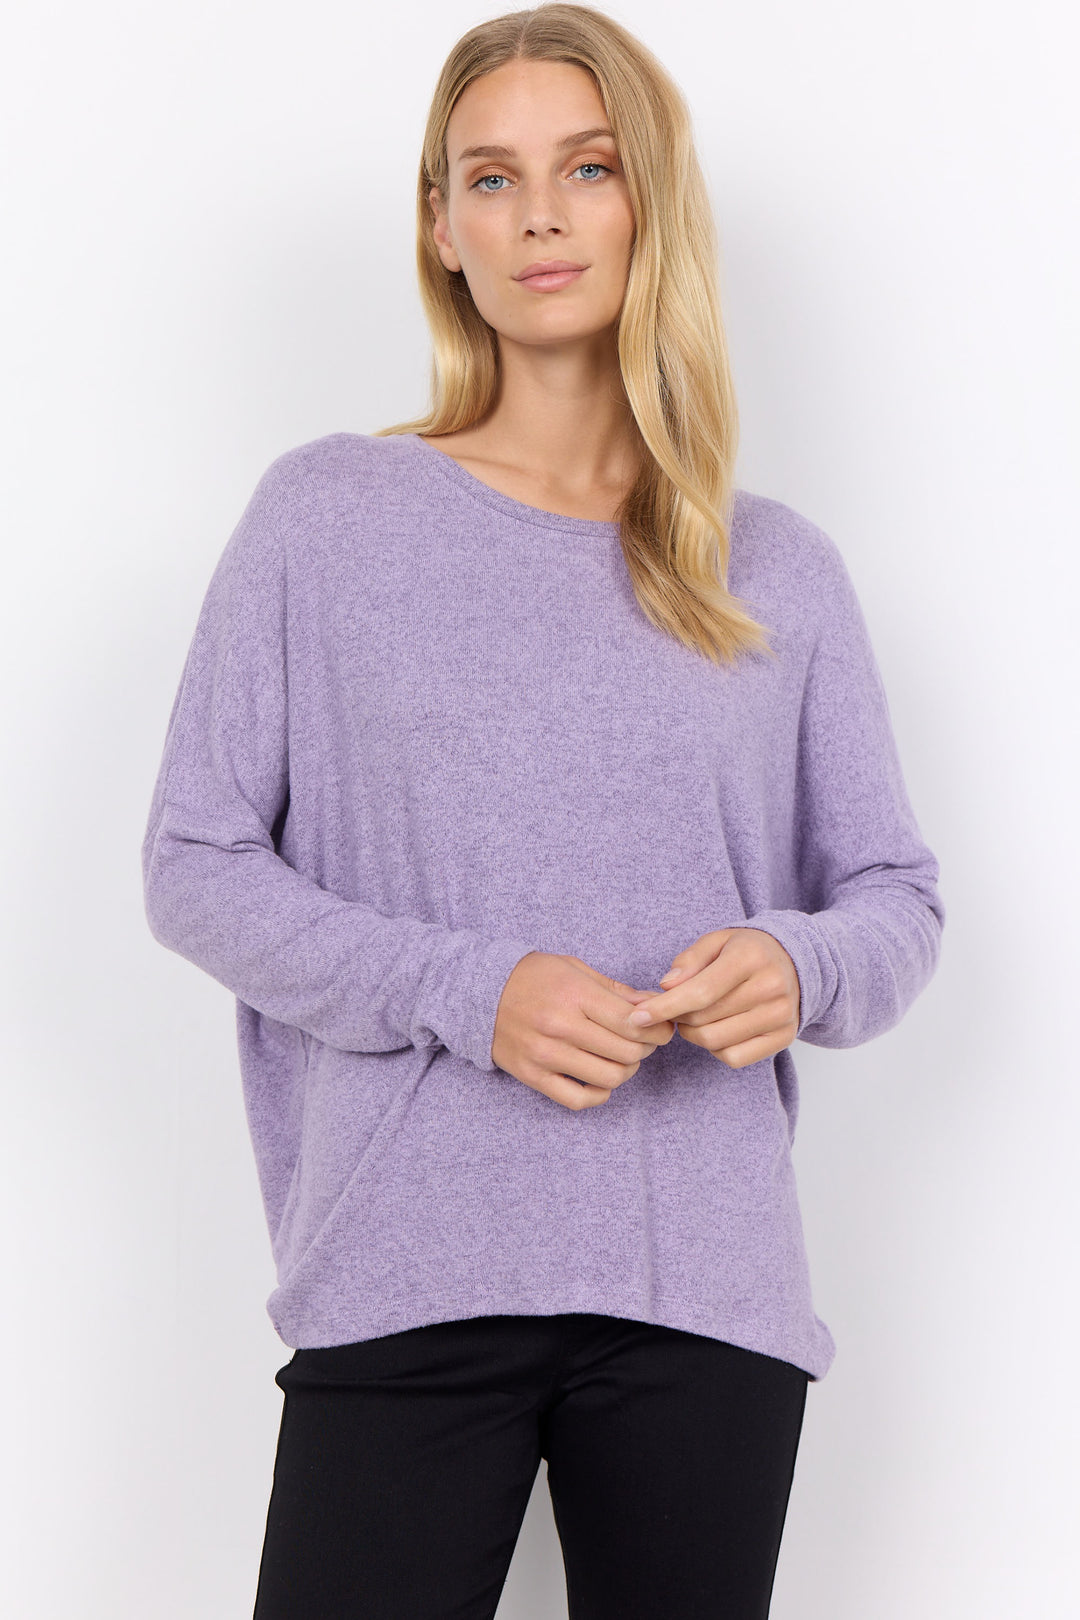 With its airy and cozy design, this light sweater top is perfect for any season. 